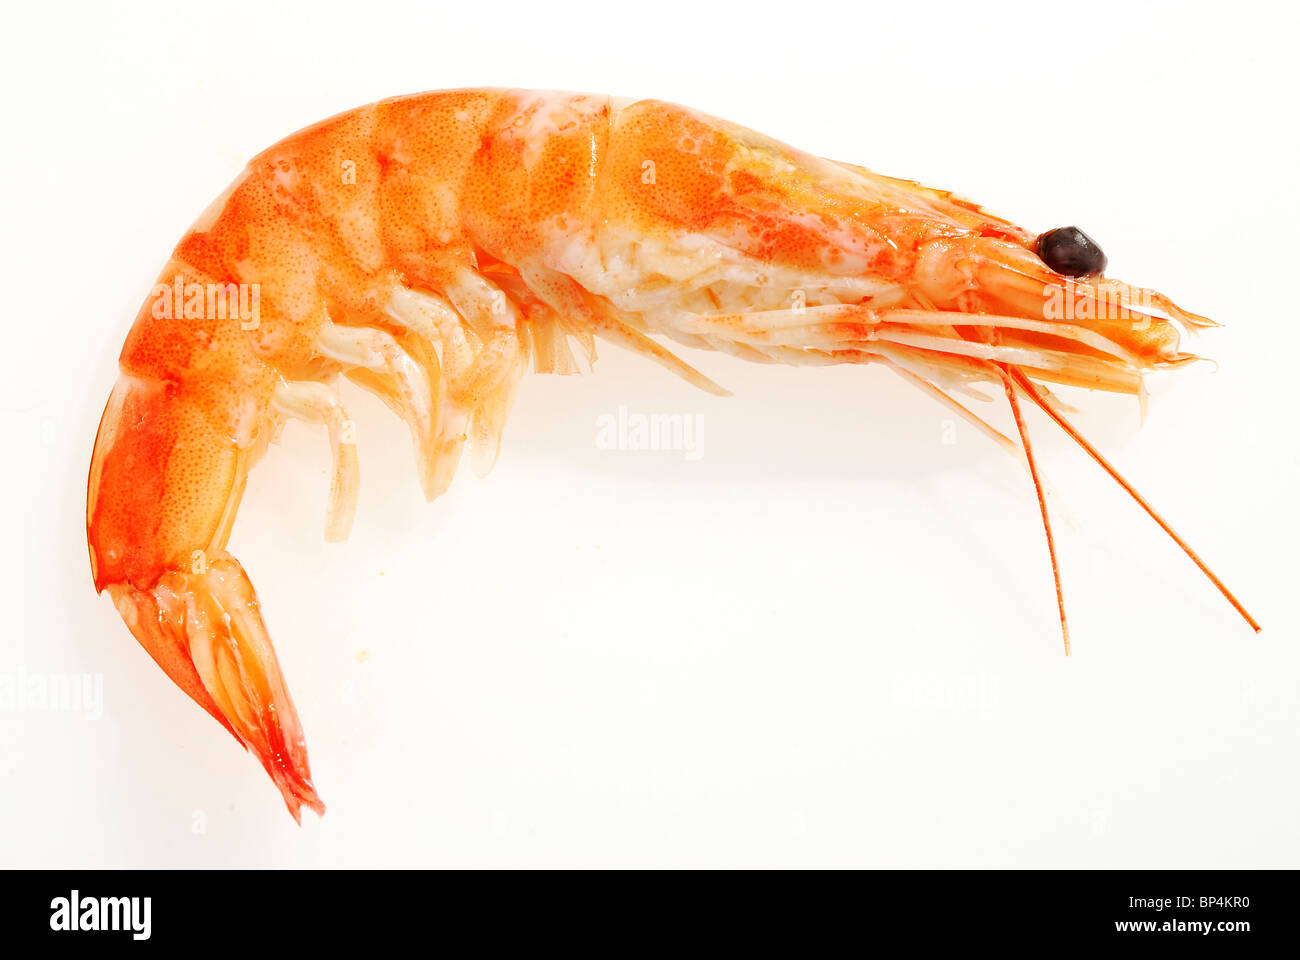 The Red Shrimps single Stock Photo